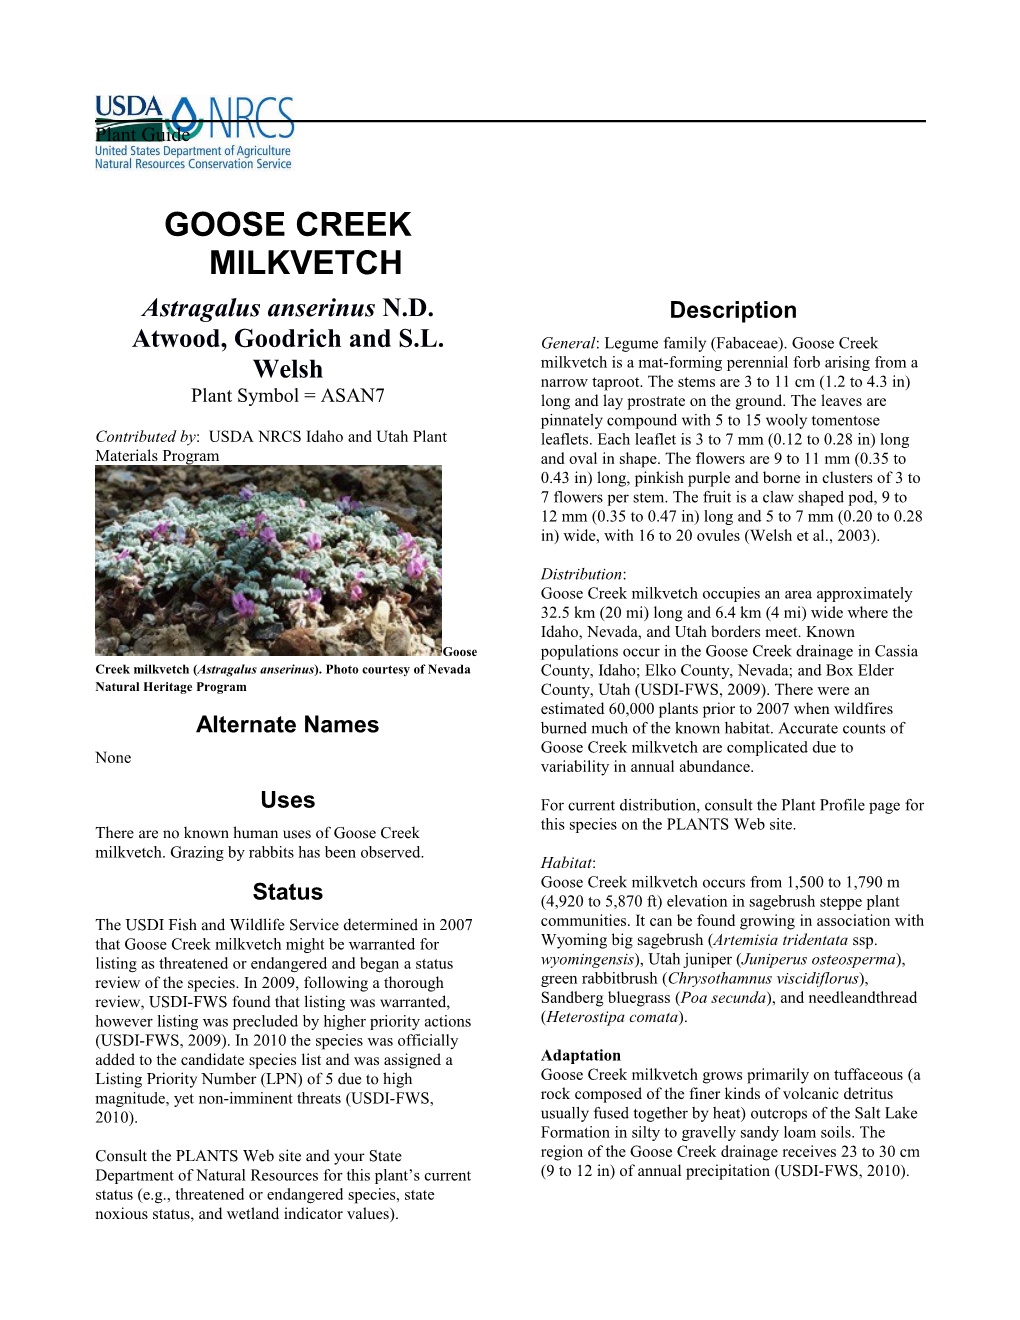 Plant Guide for Goose Creek Milkvetch (Astragalus Anserinus)